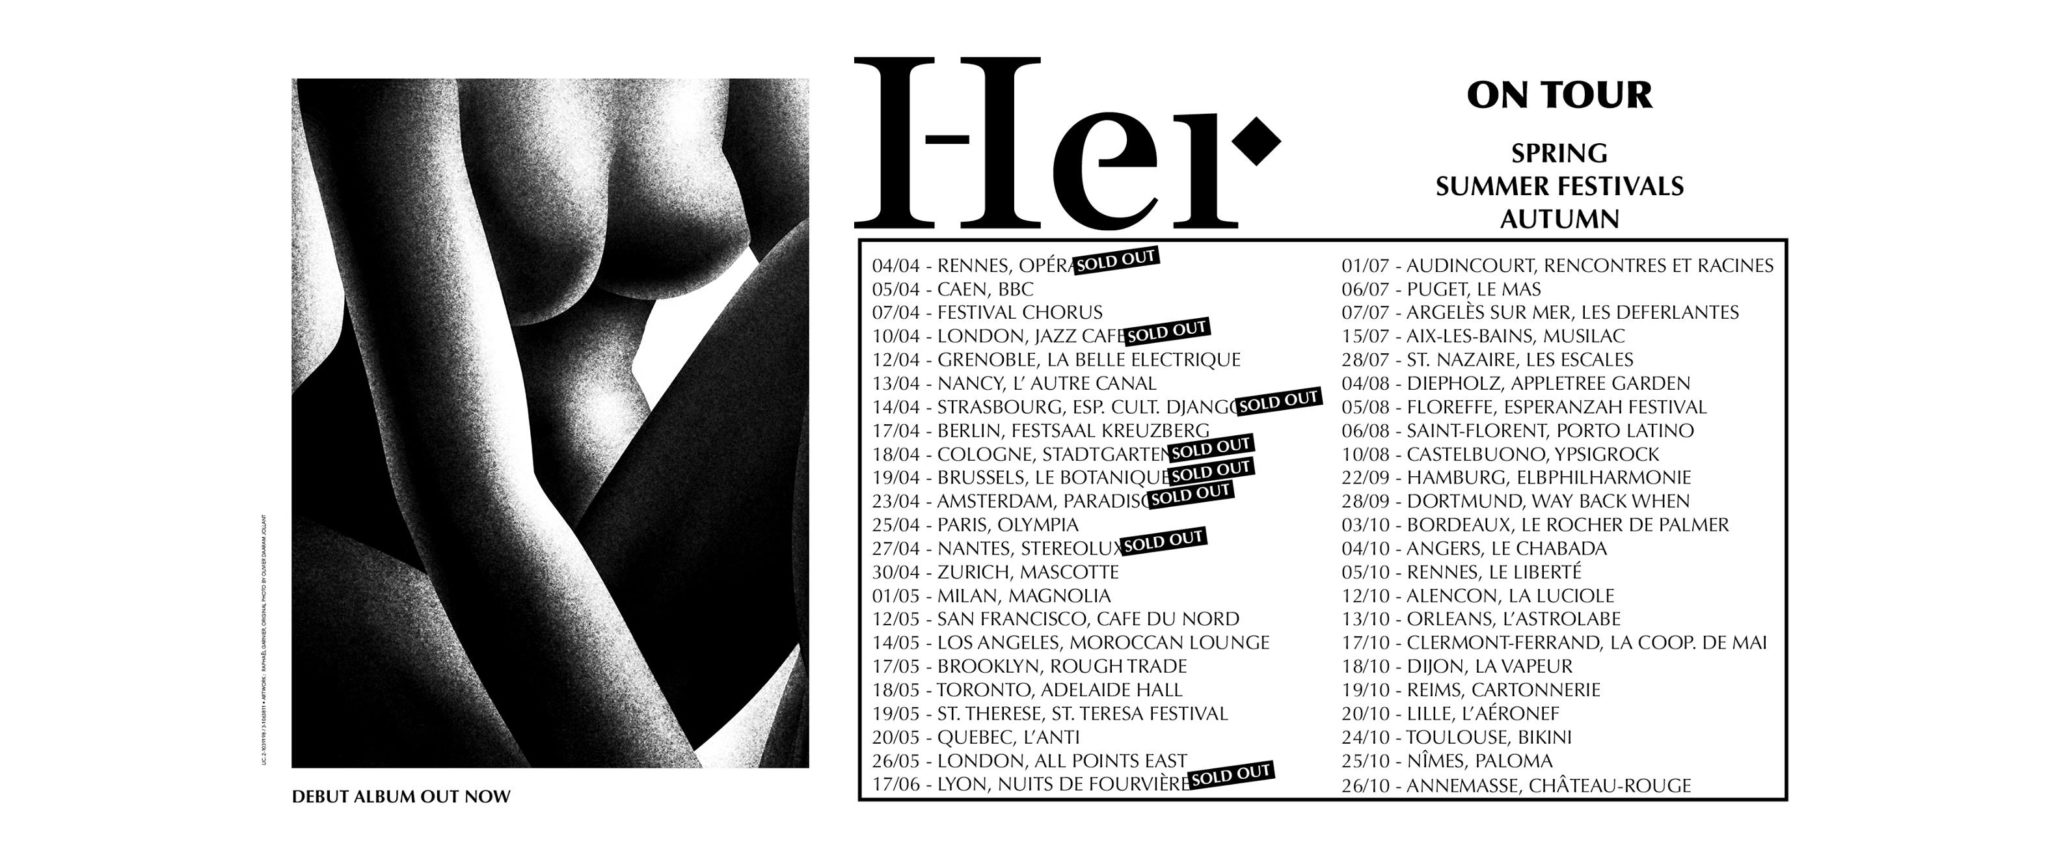 HER on tour